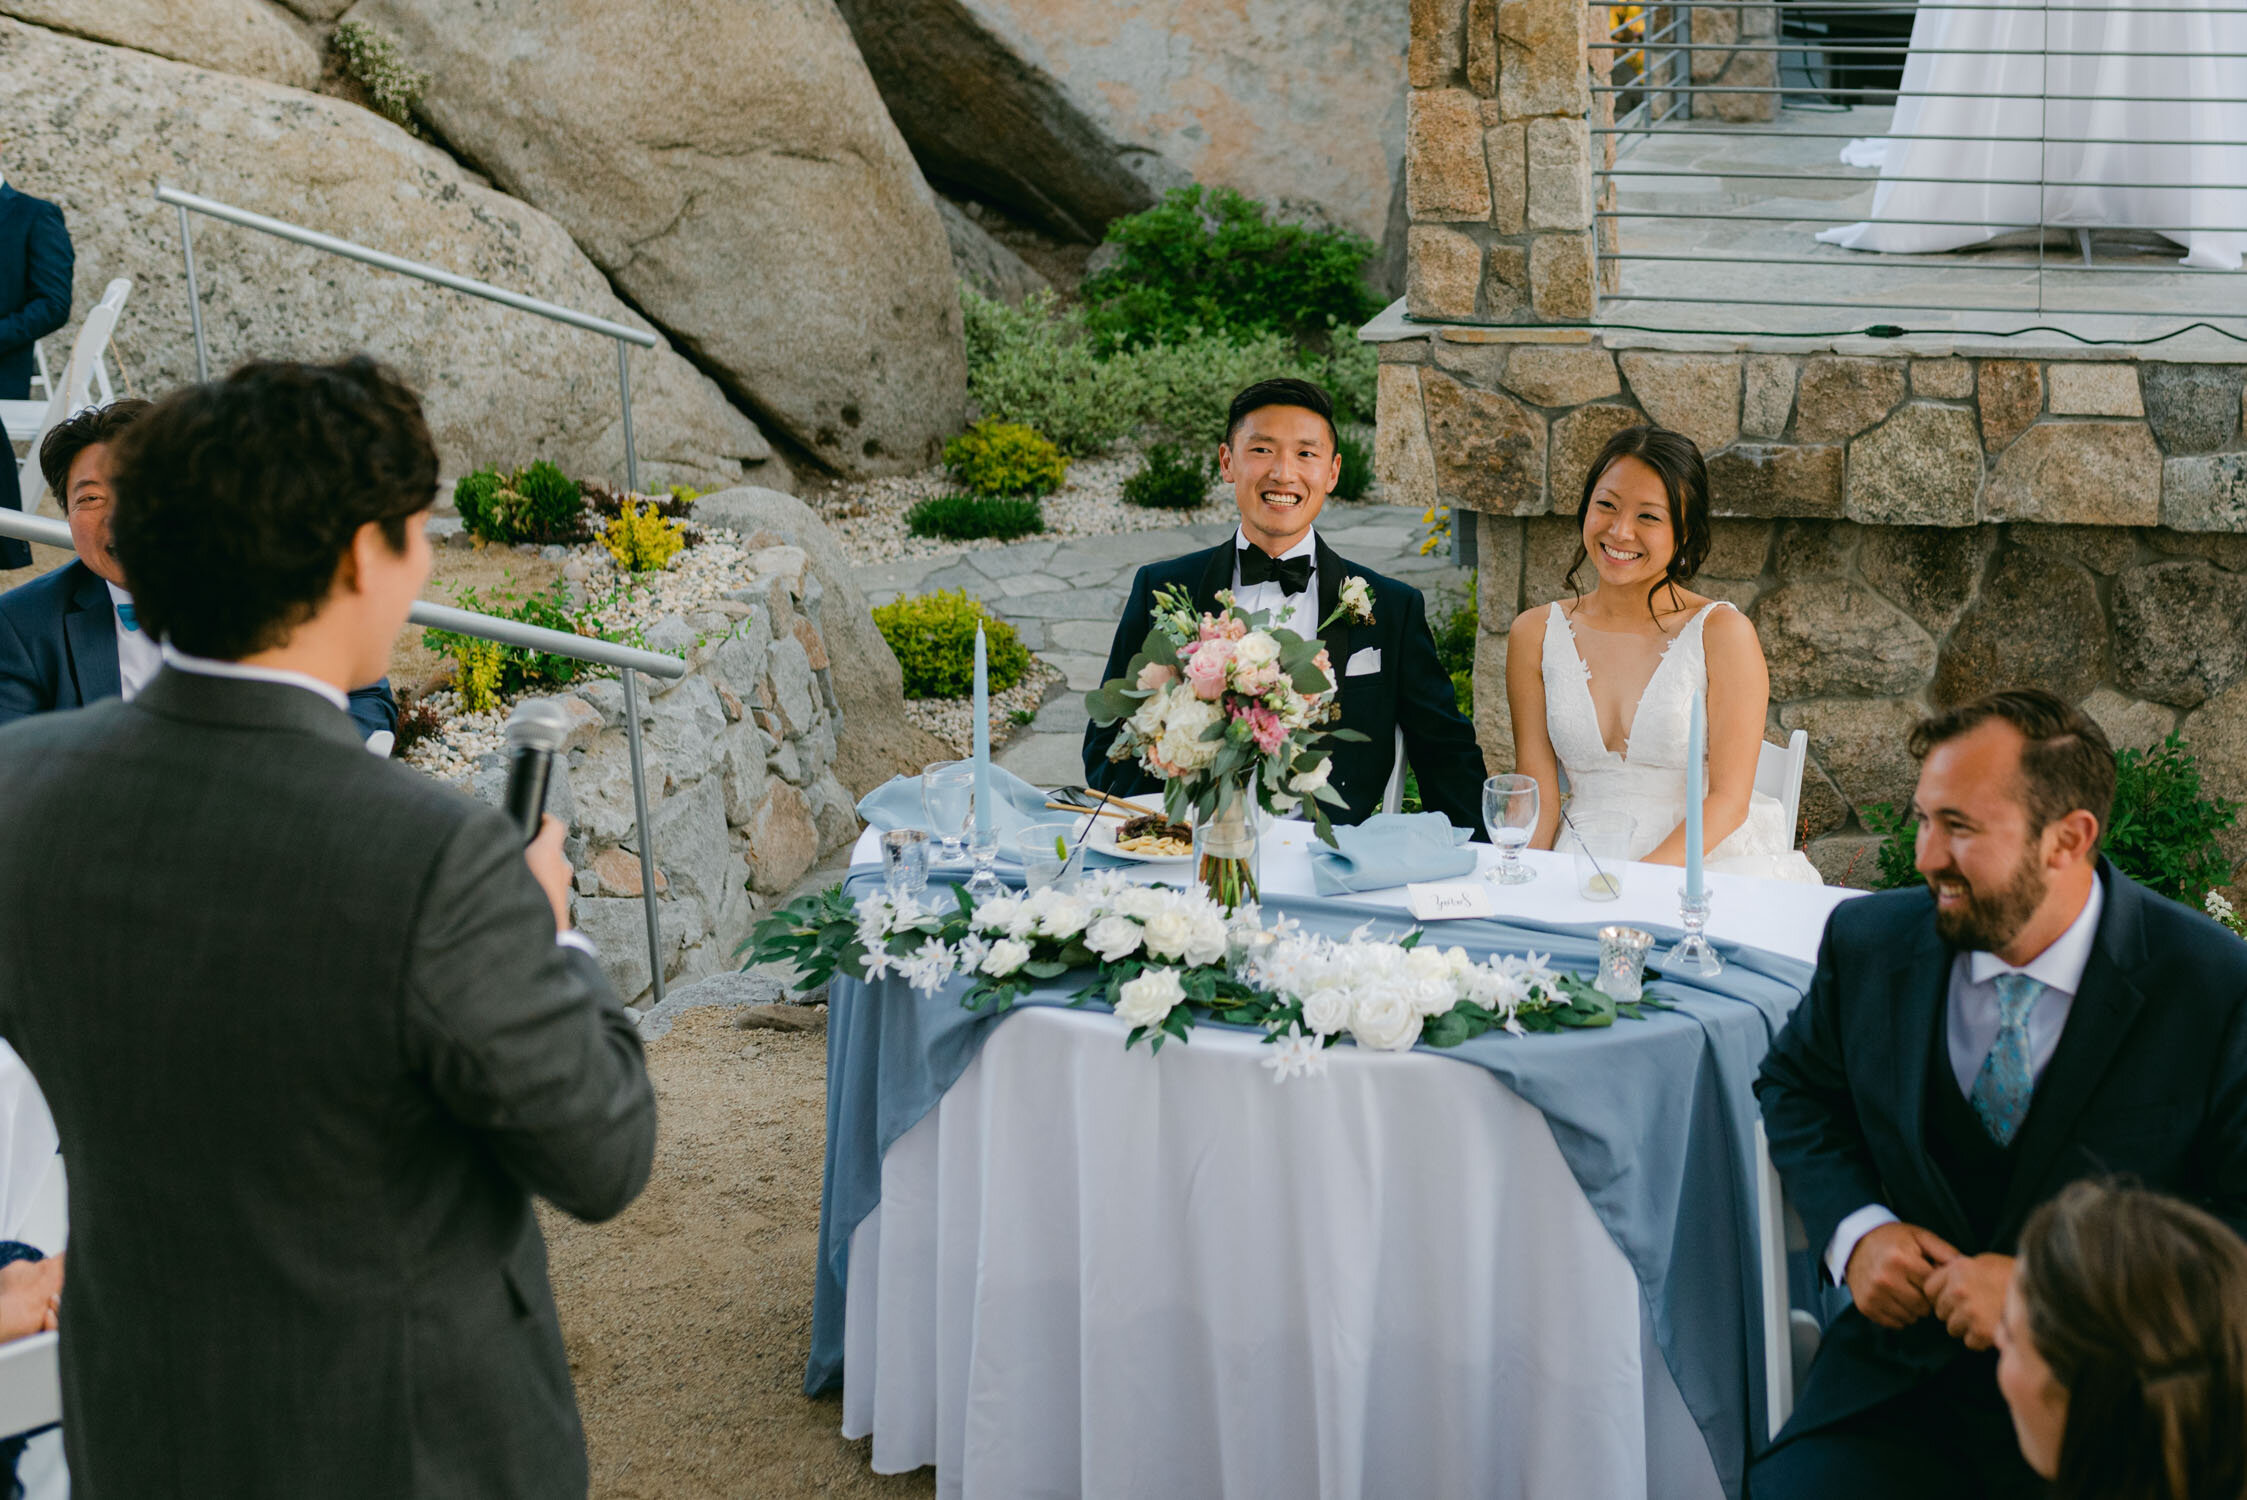 Tahoe Blue estate wedding photography, photo of couple laughing